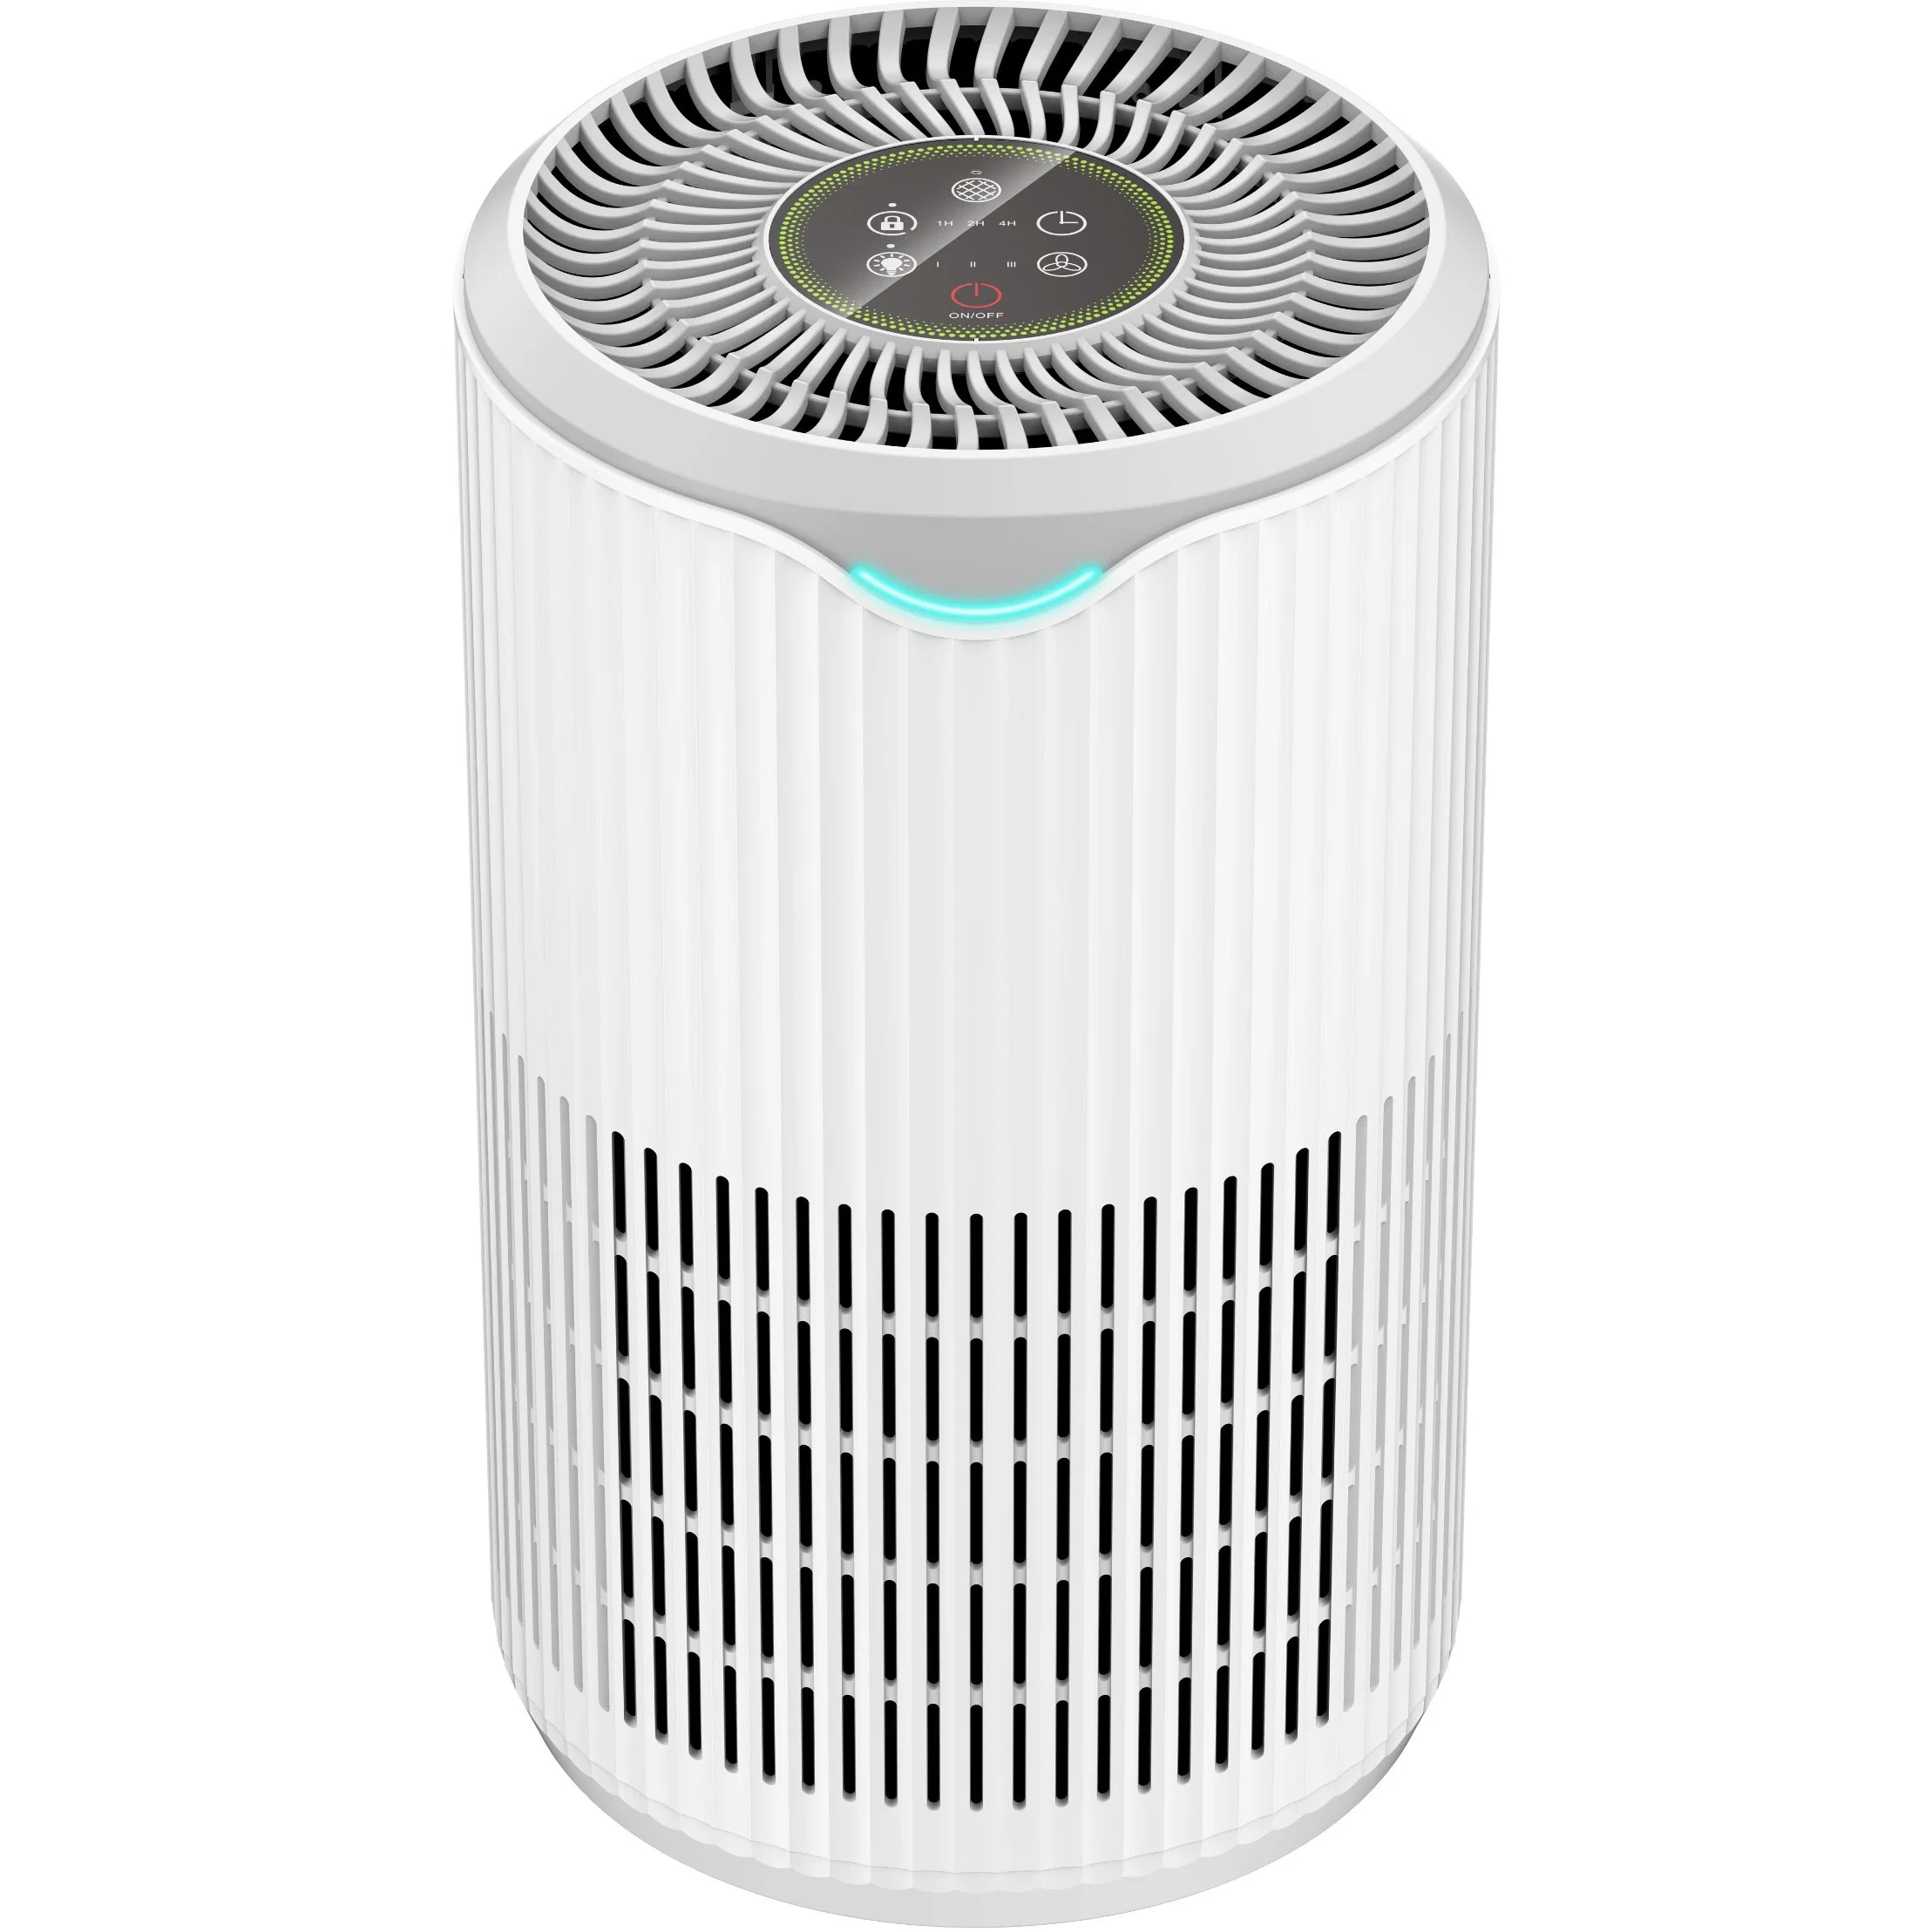 Night Light ETL Approved Activated Carbon Filter True HEPA Air Purifier with High Quality